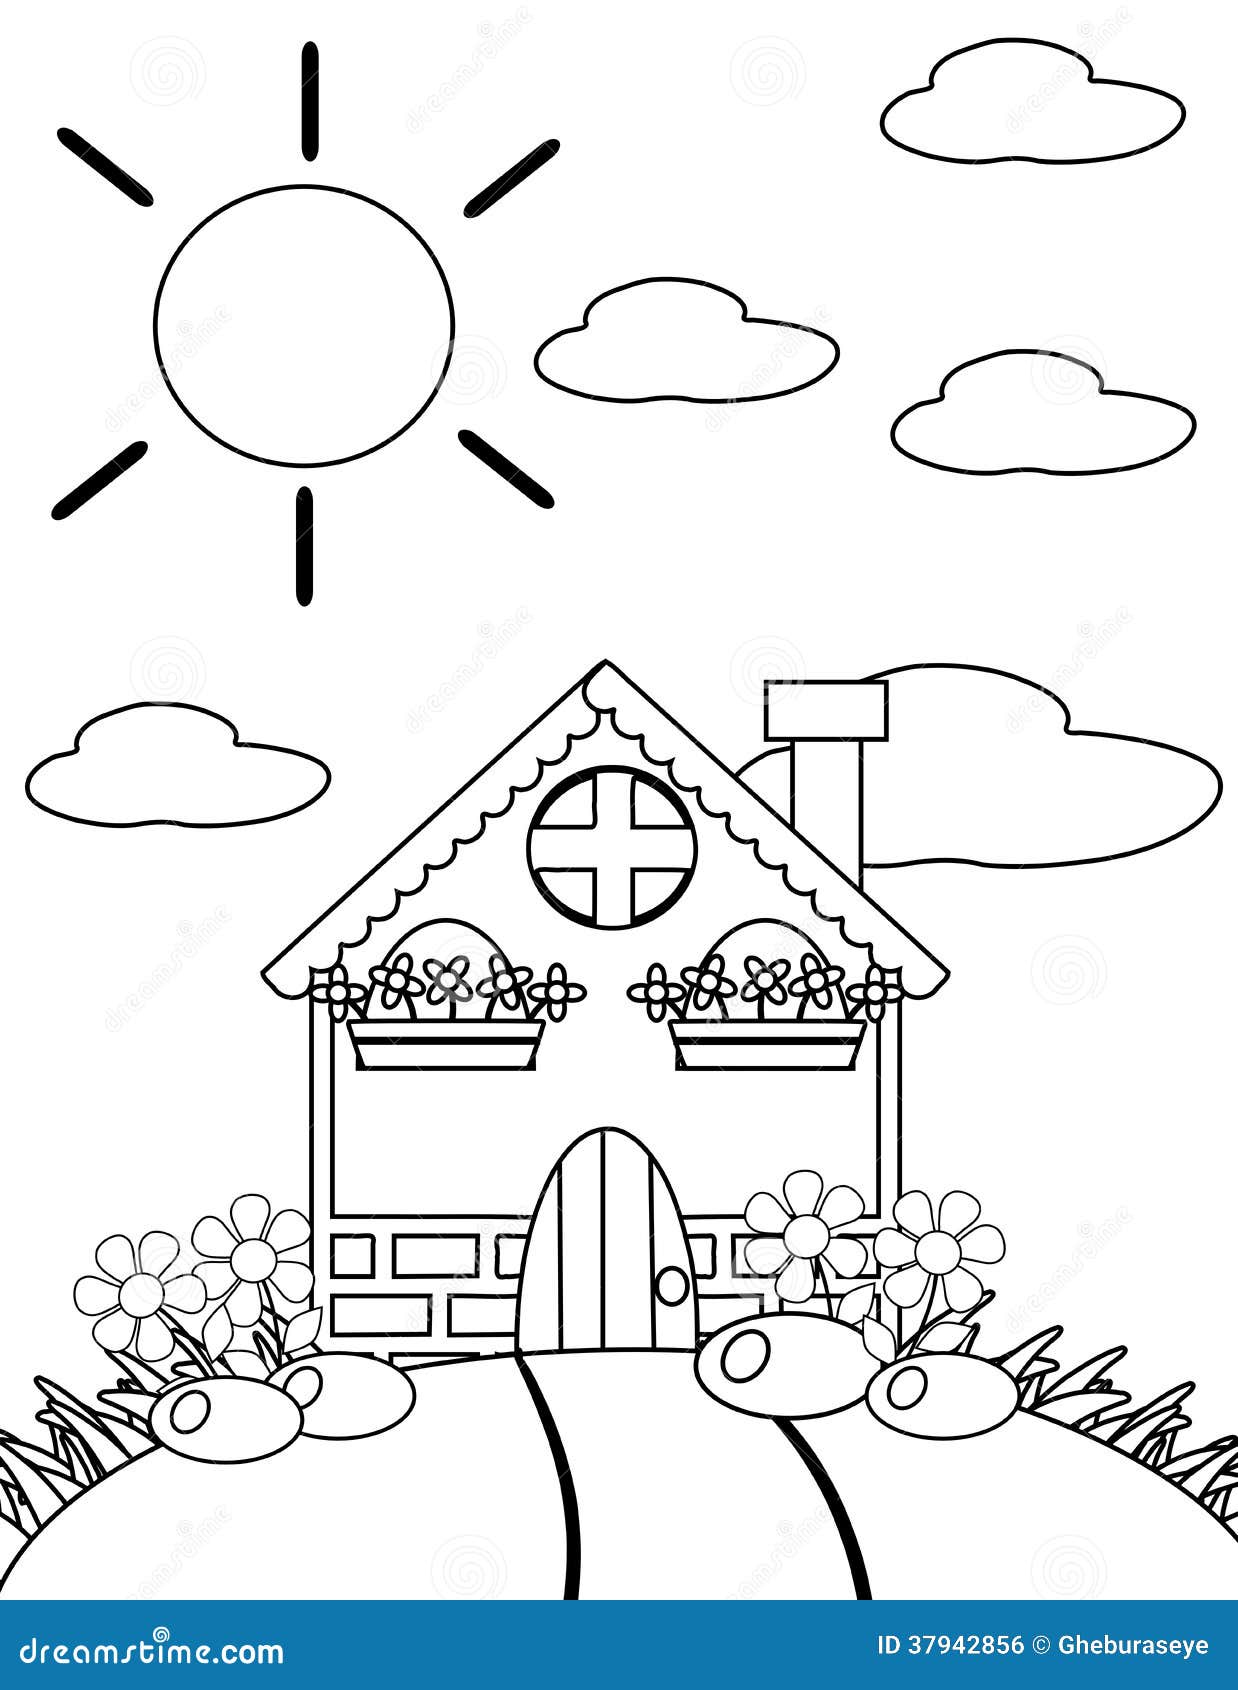 Coloring the House in Black and White Stock Illustration ...